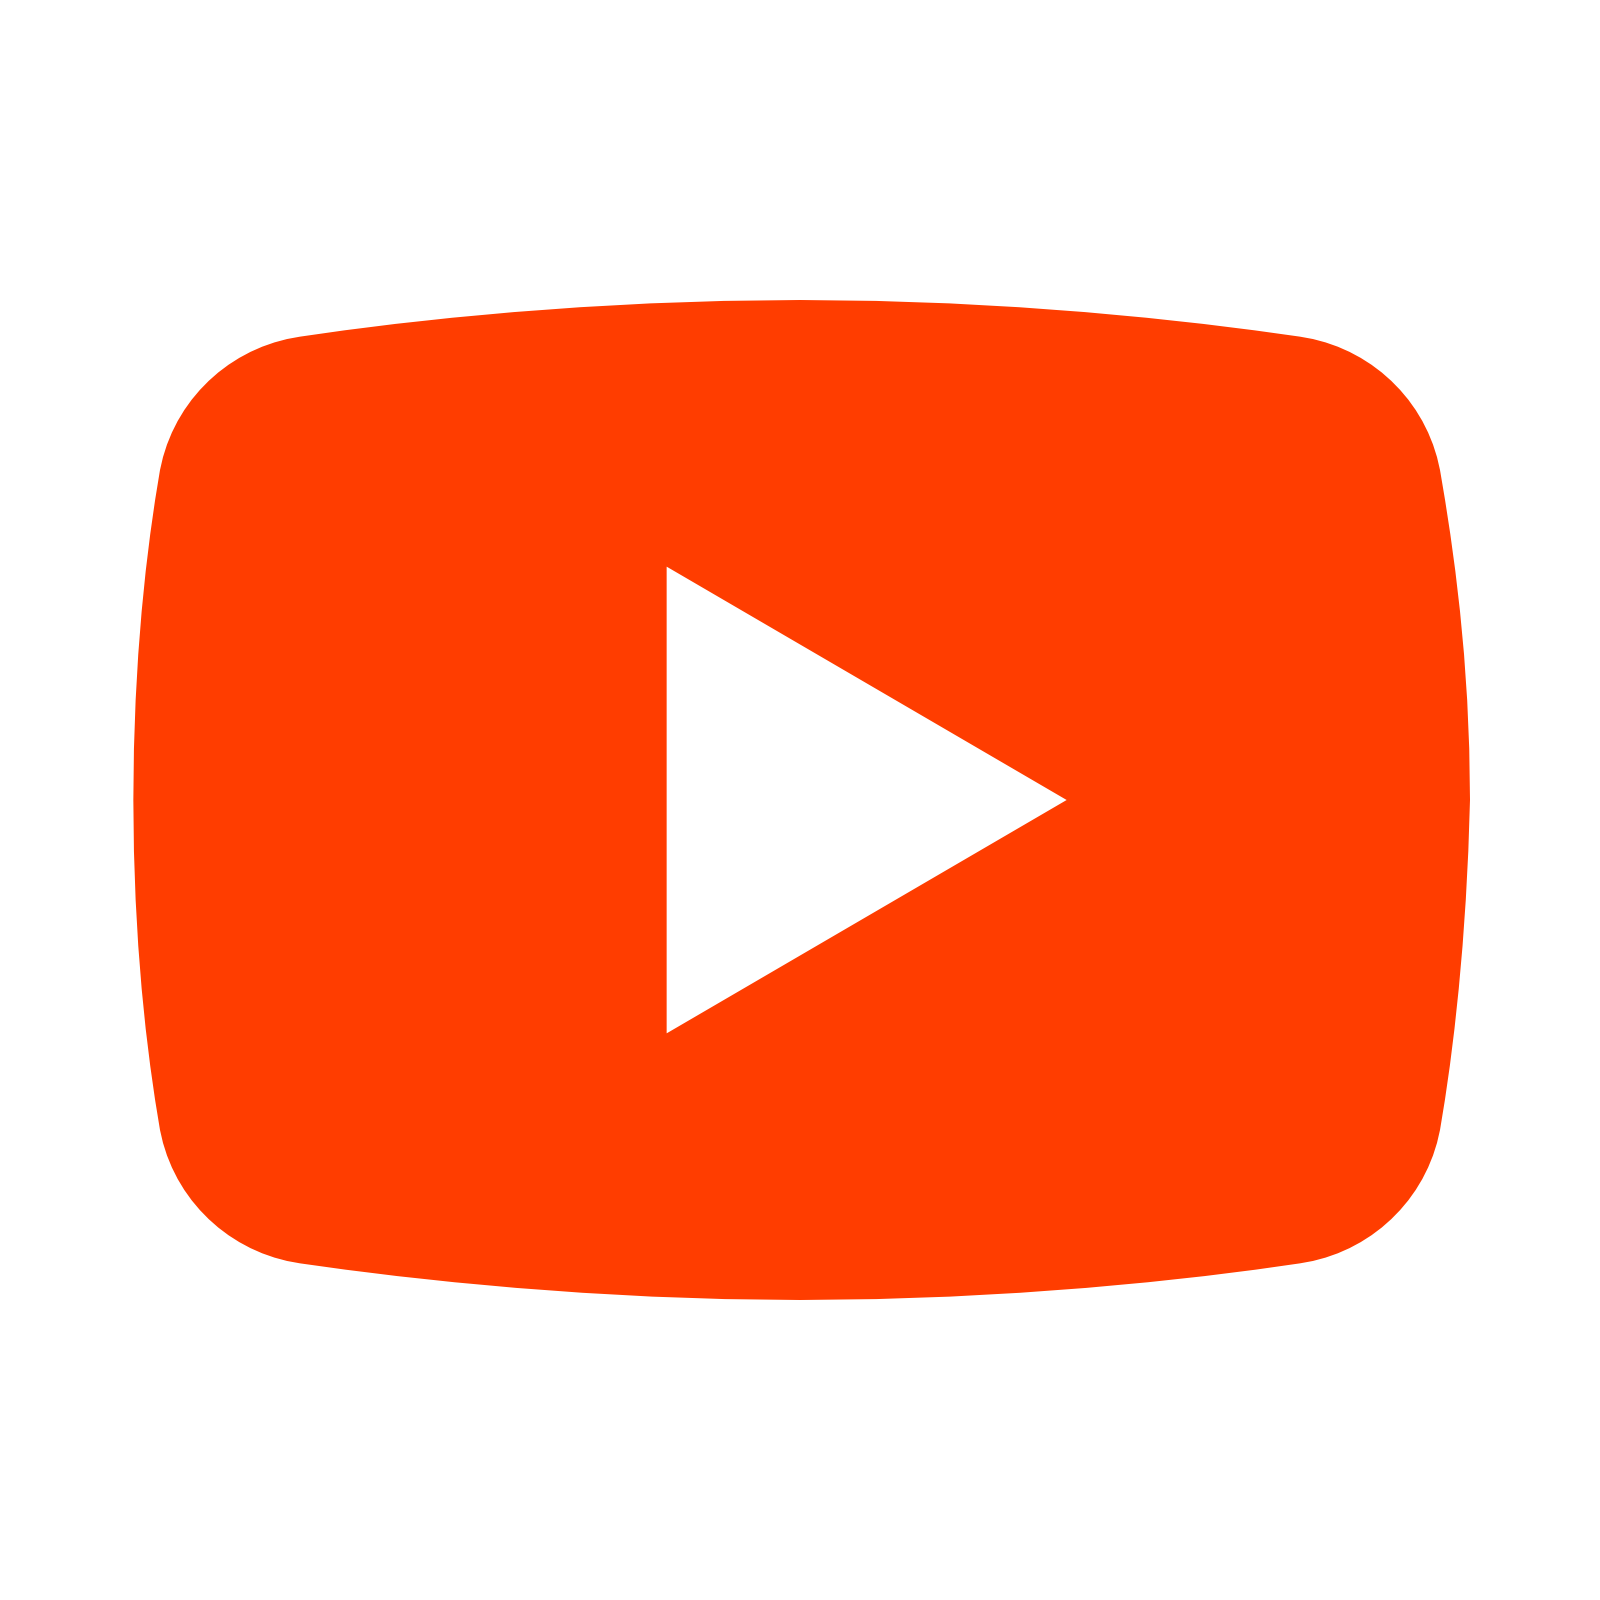 Image youtube play png. Video clipart file